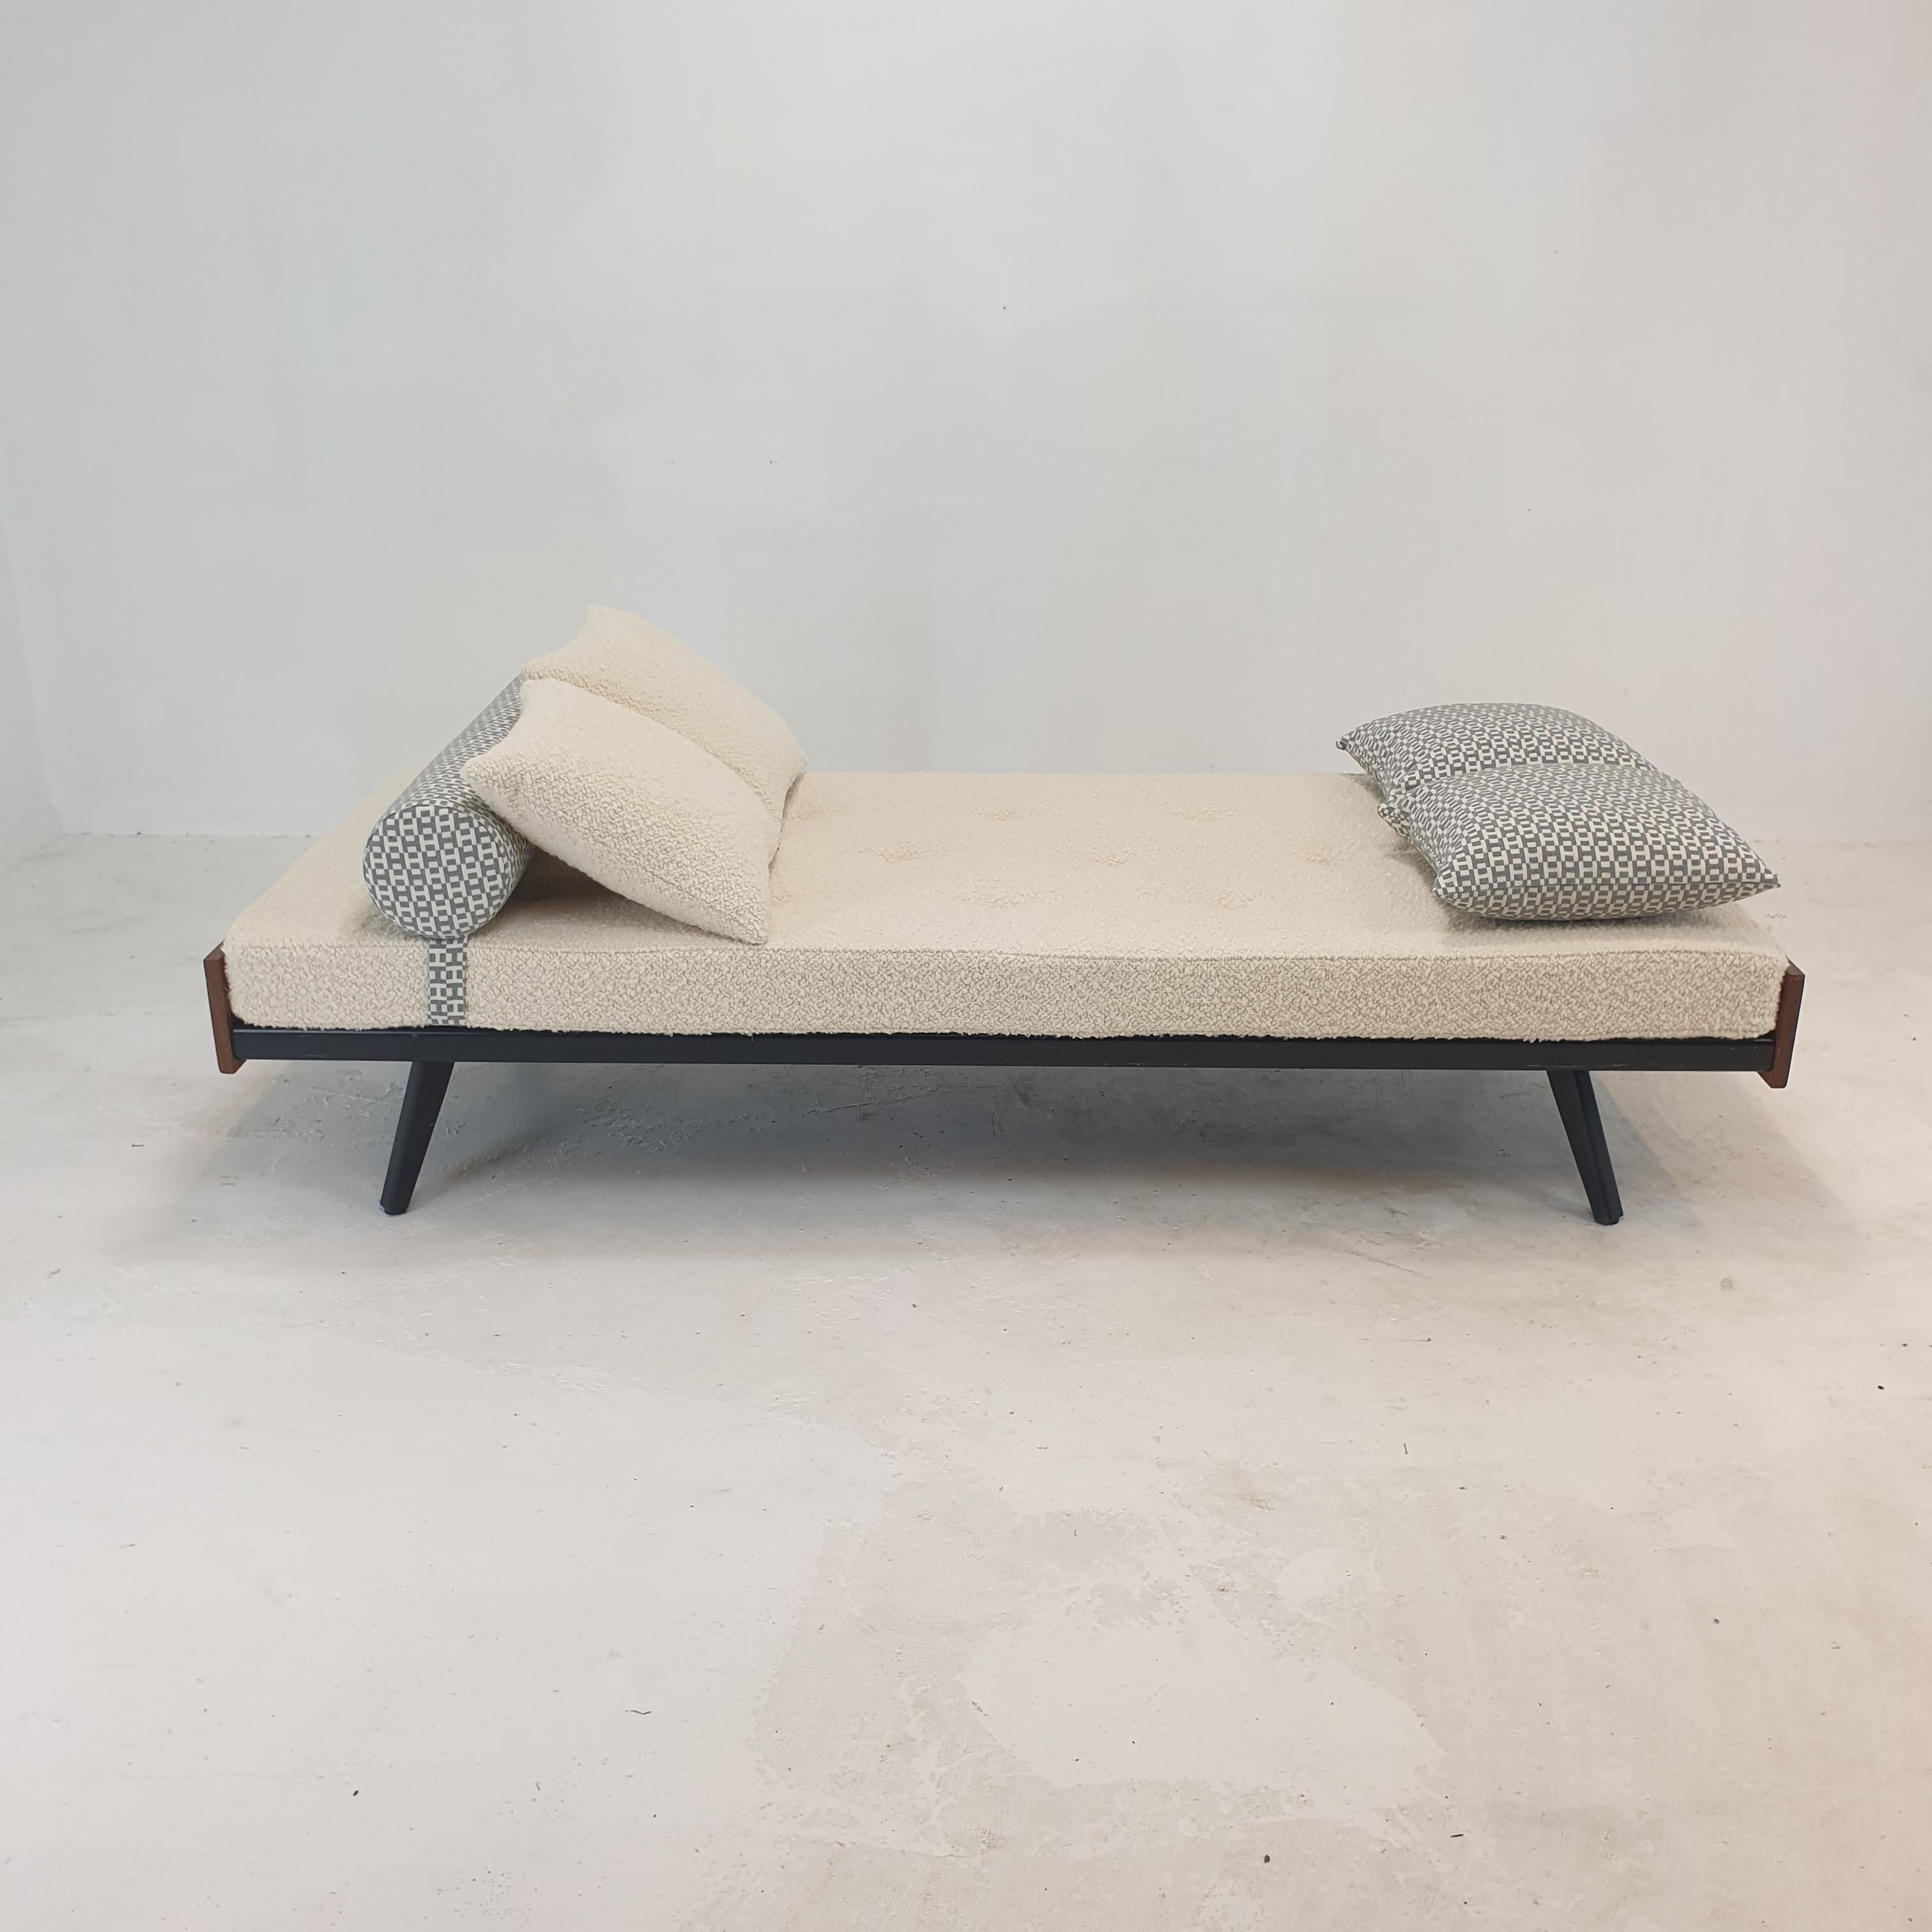 Very nice daybed, fabricated in The Netherlands in the 60's. 
It has 4 folding feet, see the last 2 pictures.

The mattress is renewed with new foam and it has just been upholstered with lovely wool fabric, the same for two cushions.

The